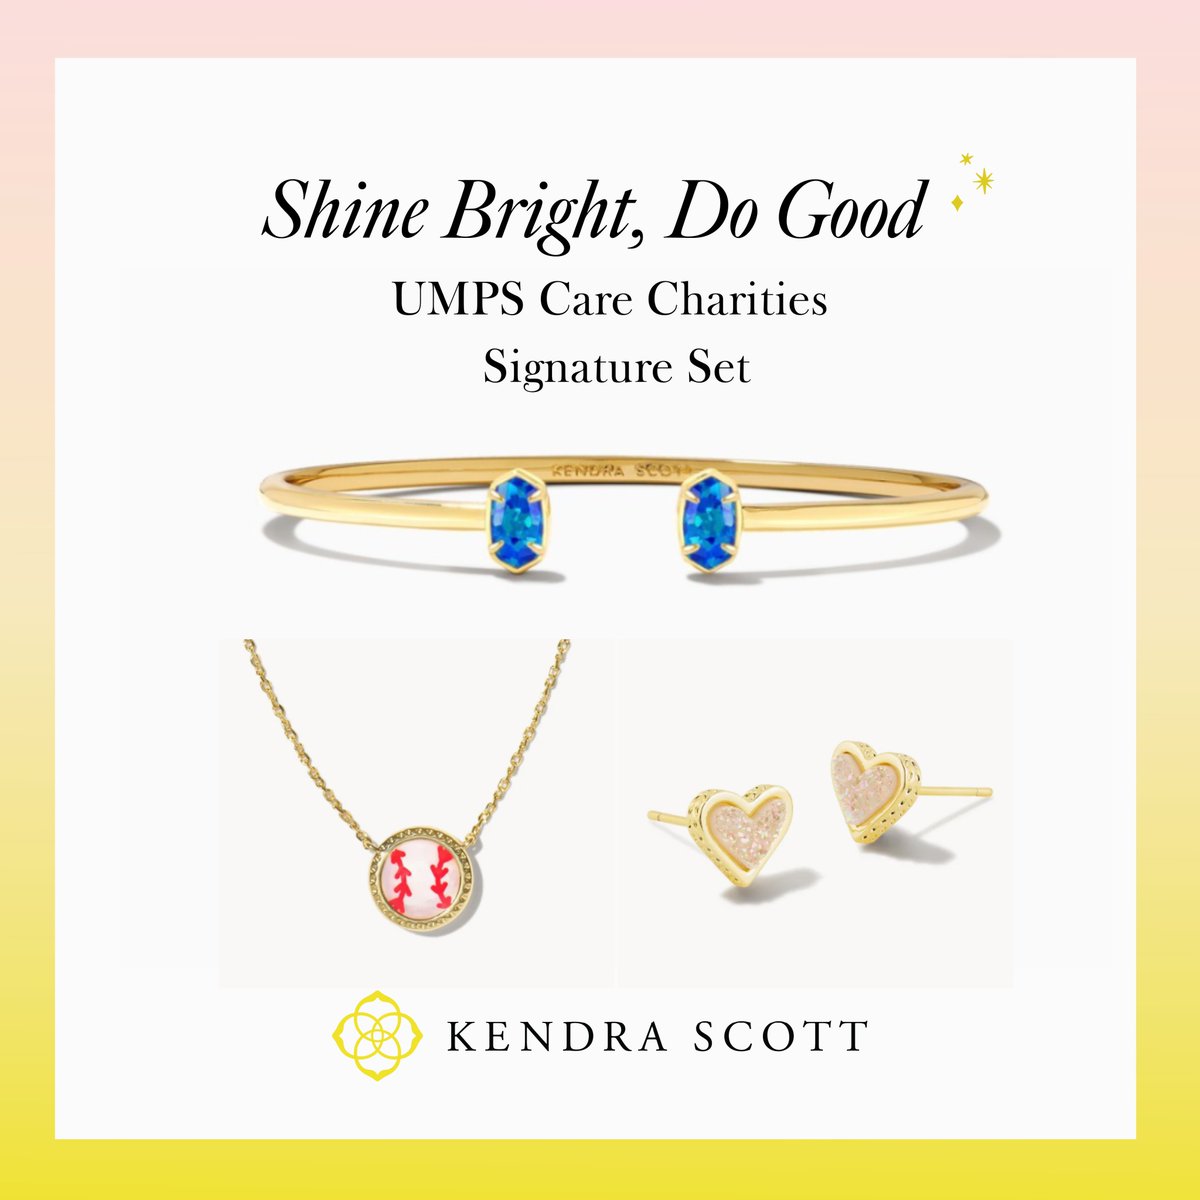 Let's go shopping @KendraScott 
Online or at Park Meadows Mall in Colorado! 
2⃣0⃣% proceeds support UMPS CARE programs! 
👀our first SIGNATURE SET!
KendraScott.com